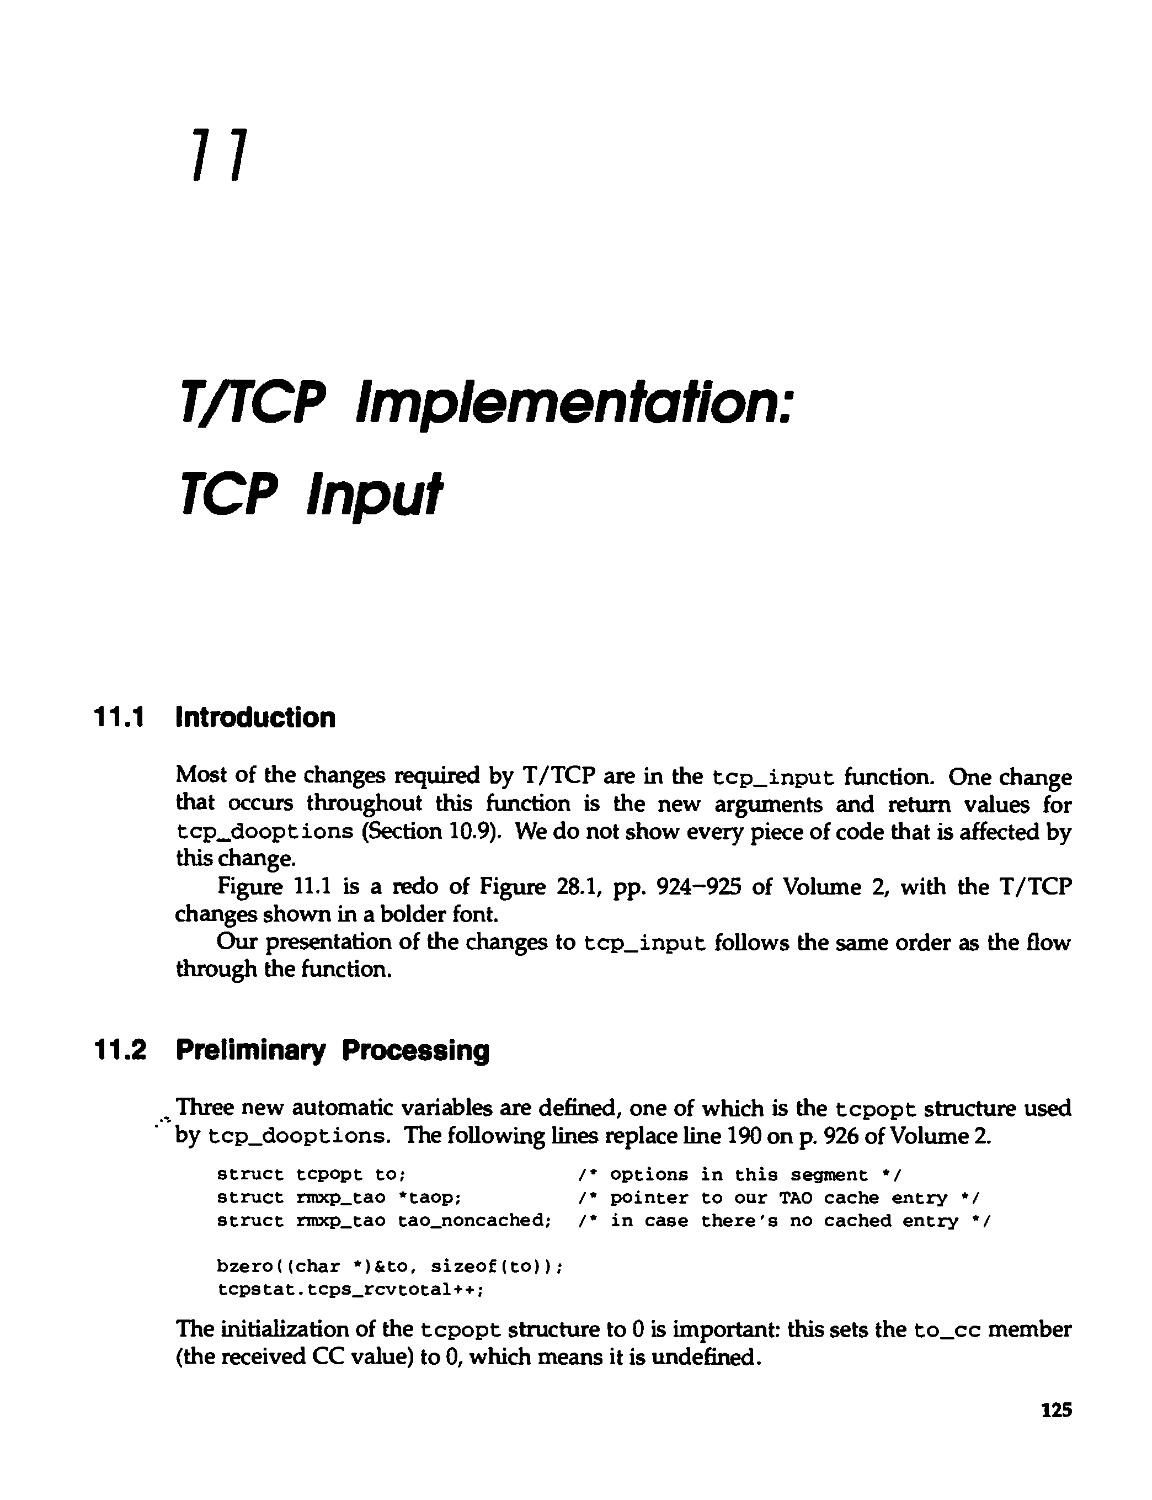 Chapter 11. T/TCP implementation: TCP input
11.2 Preliminary Processing